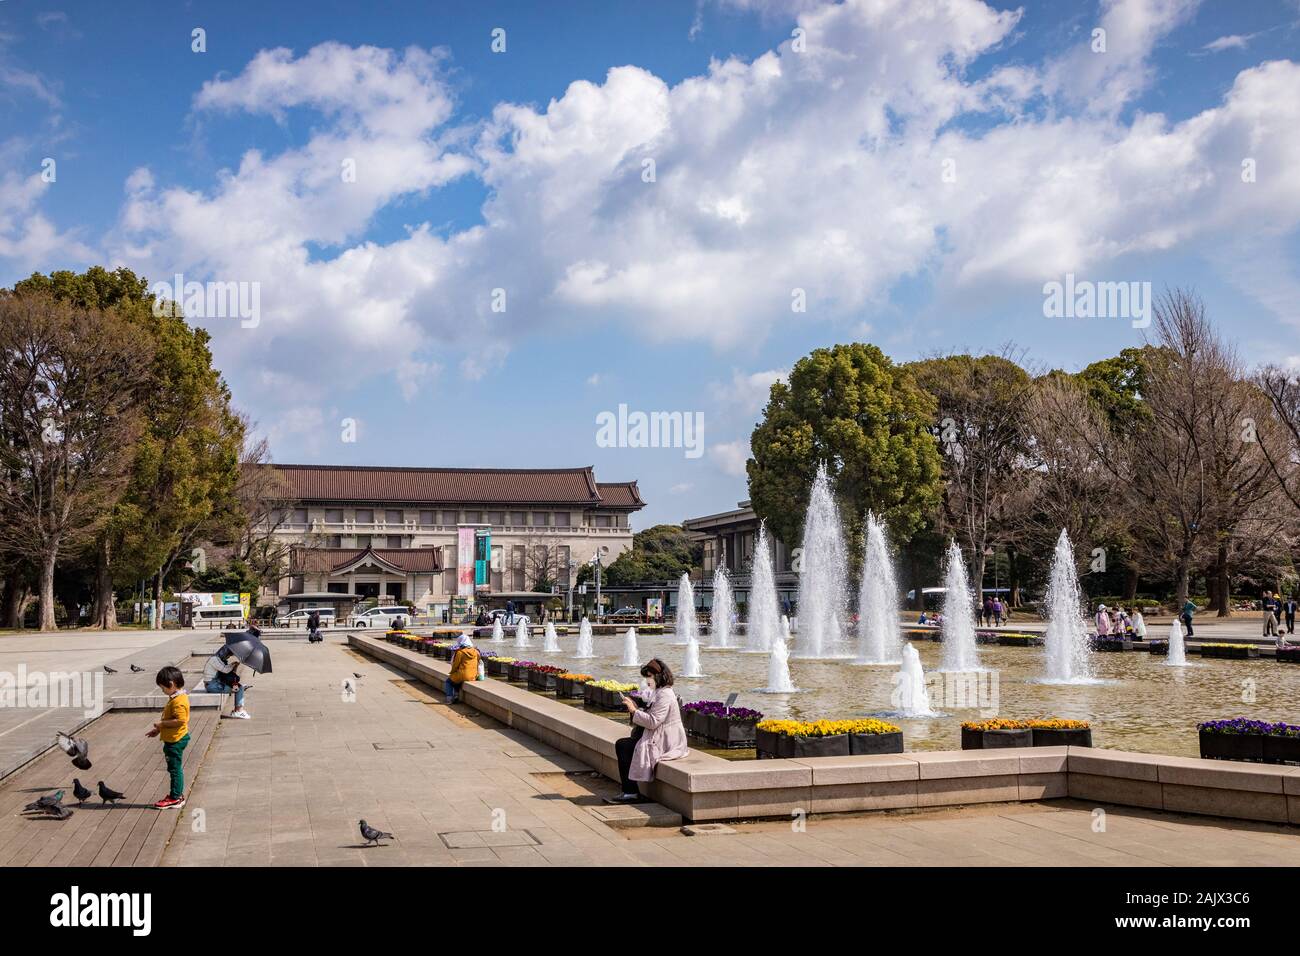 22 March 2019: Tokyo, Japan - Fountain Square in Ueno Onshi Park, Tokyo, and the Tokyo National Museum. Stock Photo